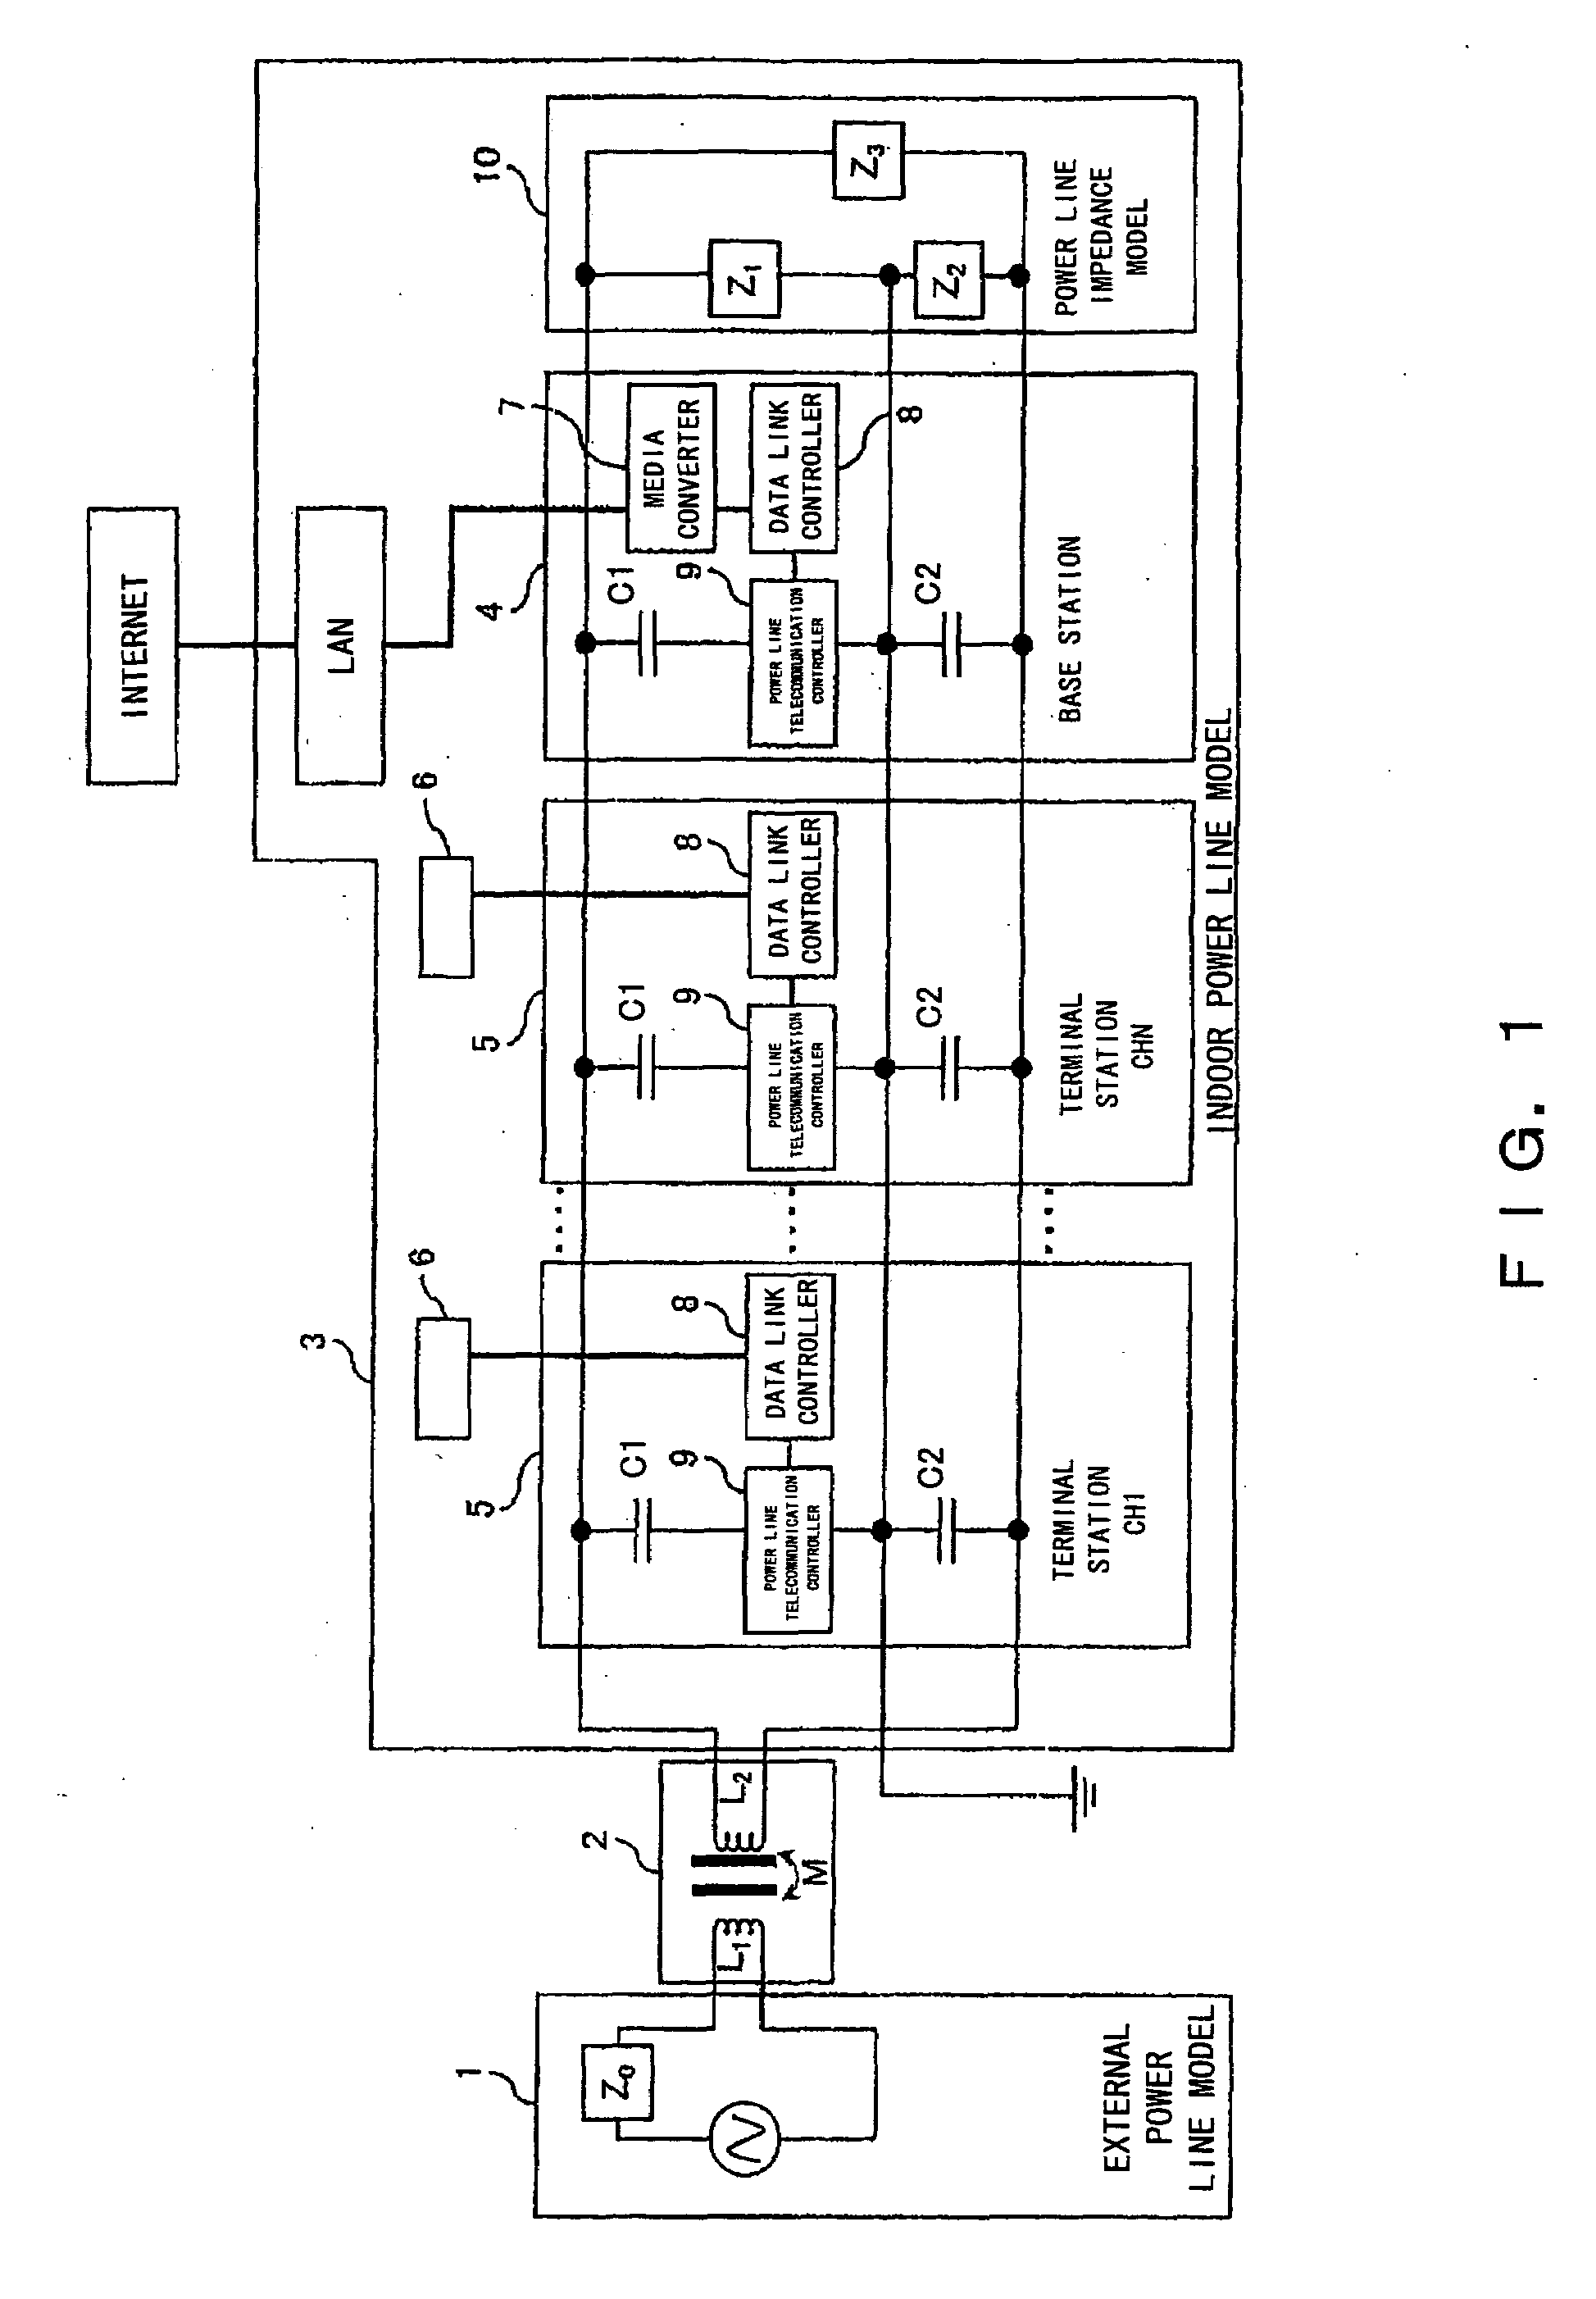 Multiple access apparatus and method using power line